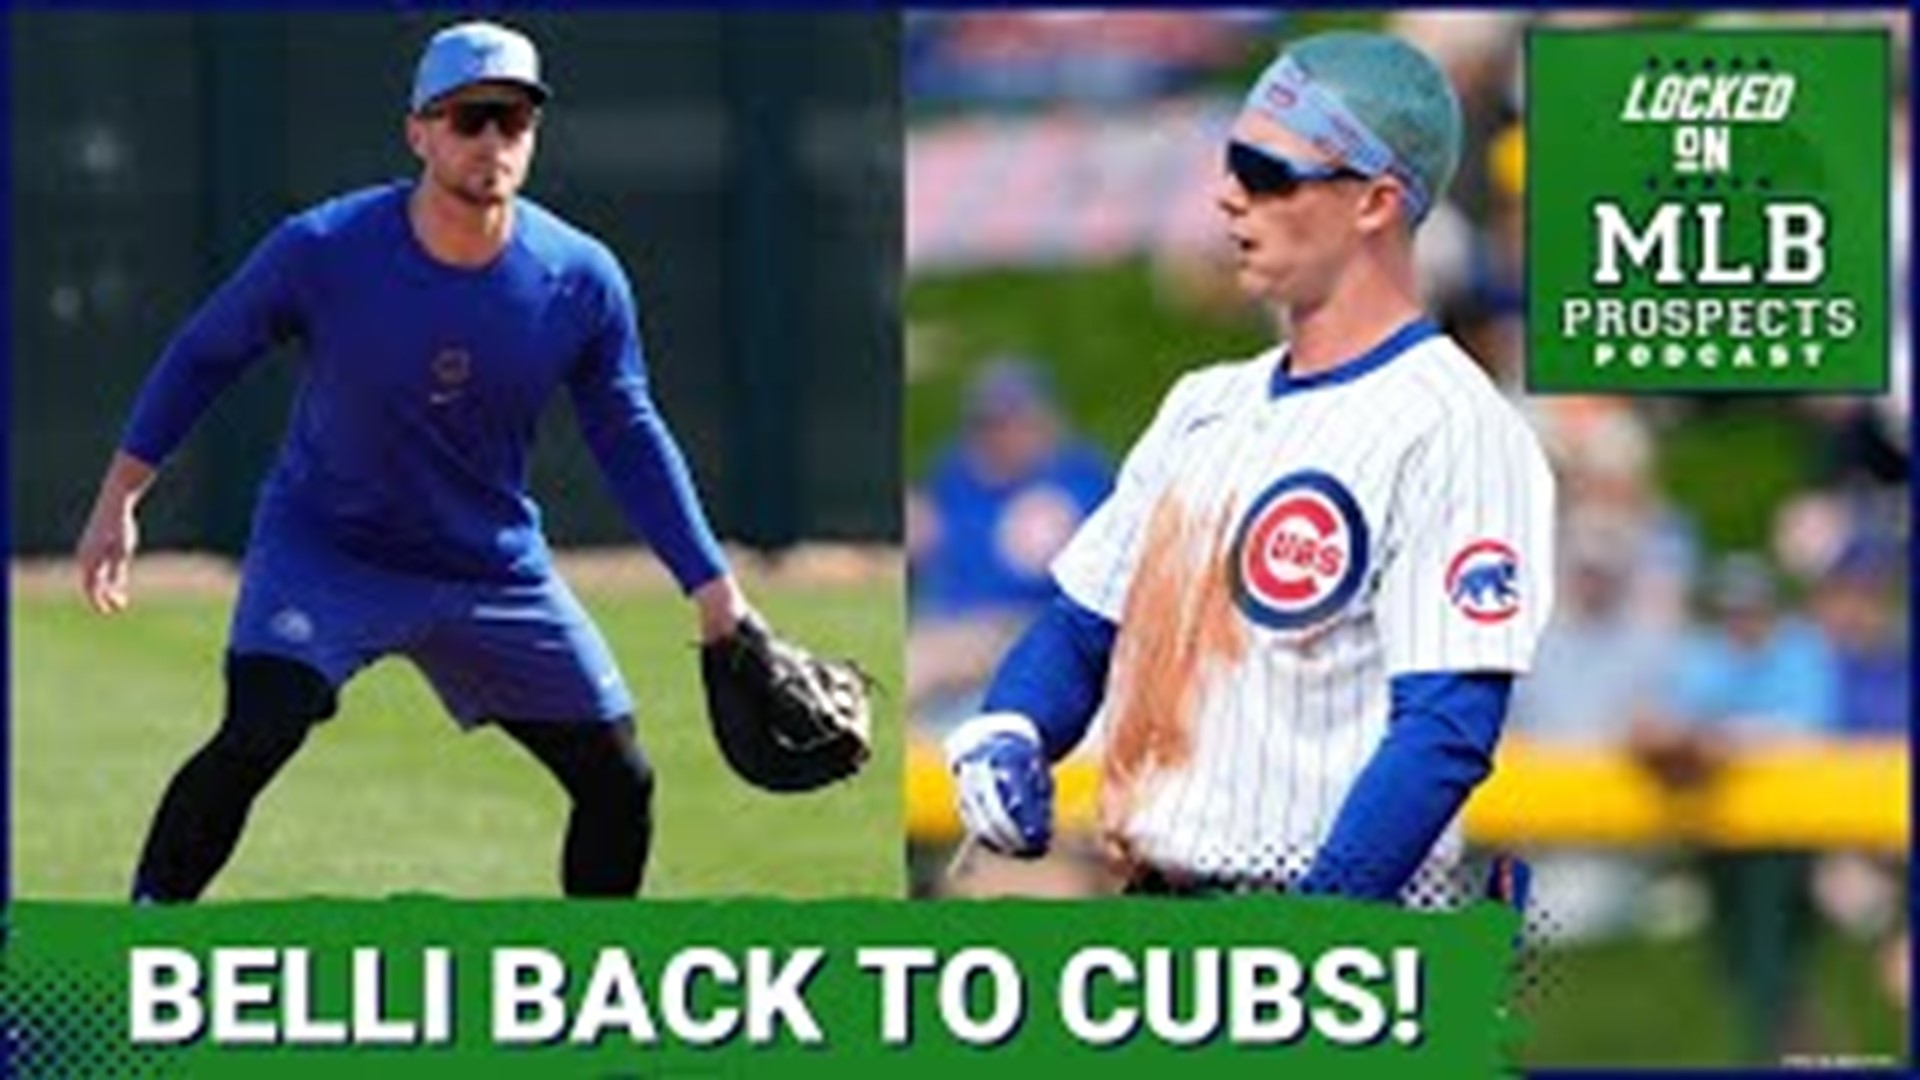 In this episode of Locked on MLB Prospects, host Lindsay Crosby discusses the impact of Cody Bellinger's return to the Chicago Cubs on prospects Pete Crow-Armstrong.